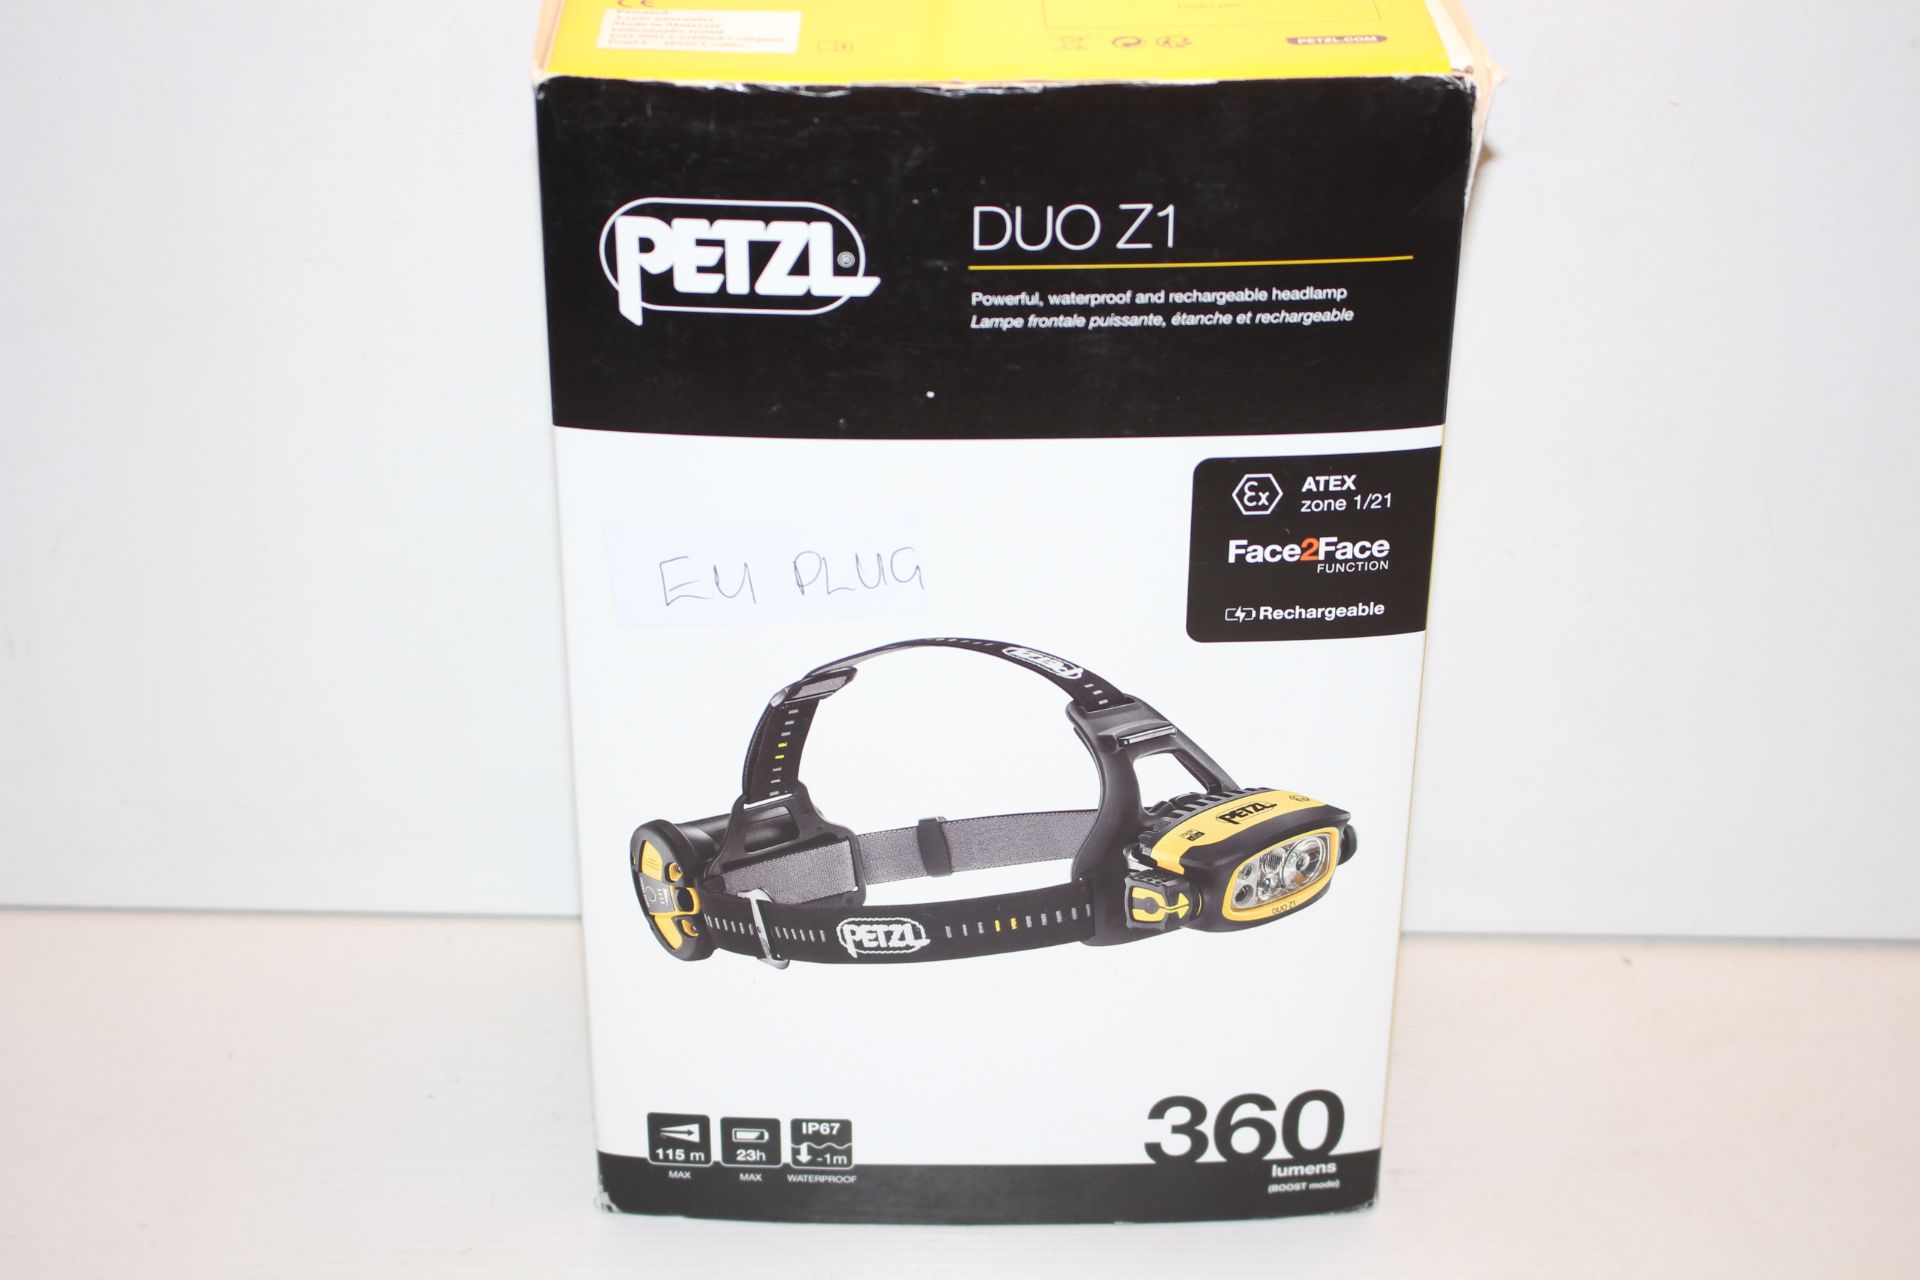 BOXED PETZL DUO Z1 POWERFUL RECHARGEABLE HEADLAMP ATEX ZONE 1/21 360 LUMENS RRP £390.60Condition